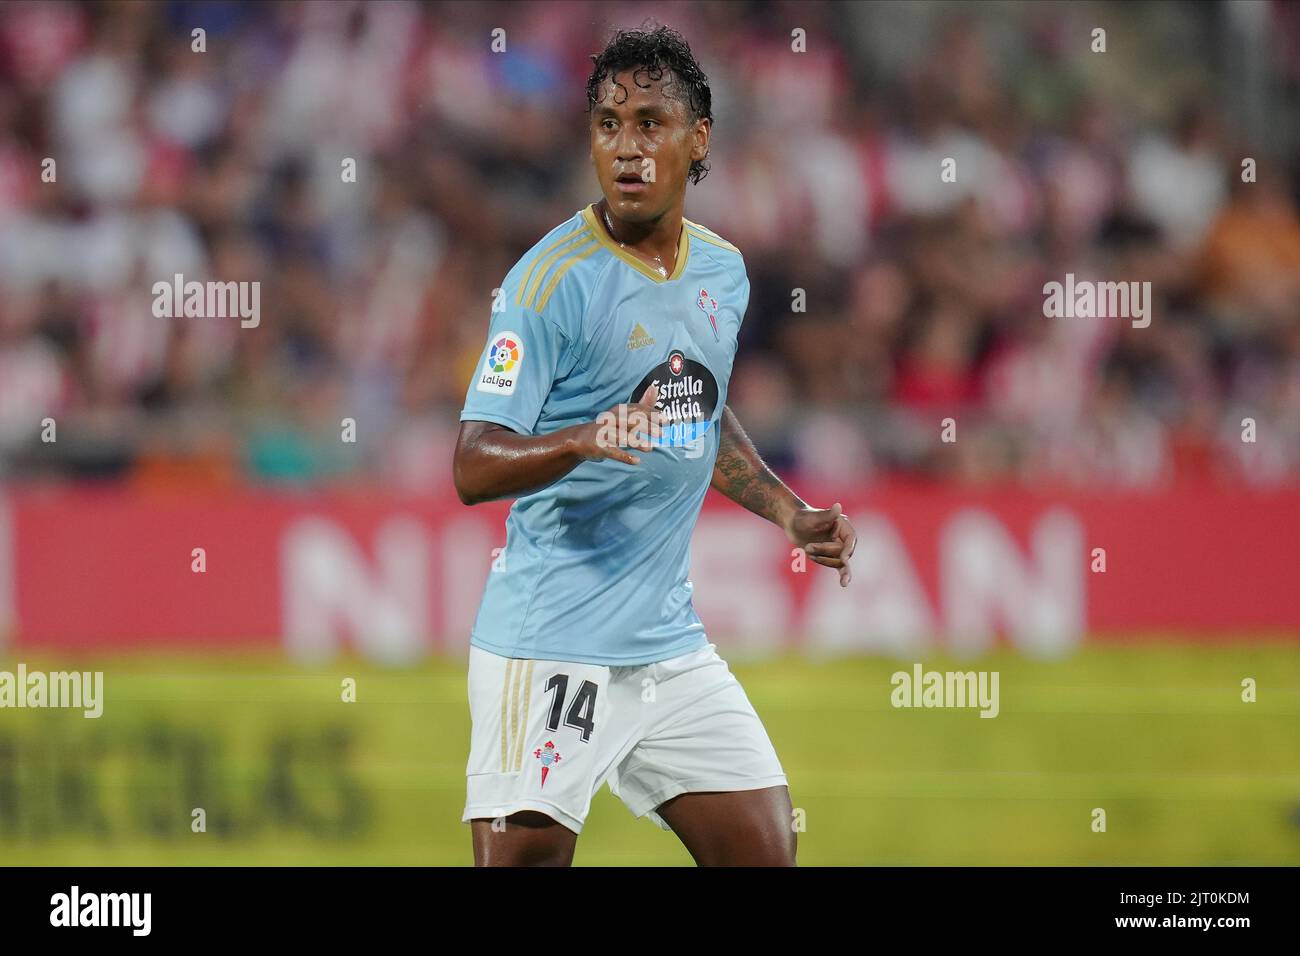 Renato Tapia of RC Celta during the La Liga match between Girona FC and RC Celta played at Montilivi Stadium on August 26, 2022 in Girona, Spain. (Photo by Sergio Ruiz / PRESSIN) Stock Photo